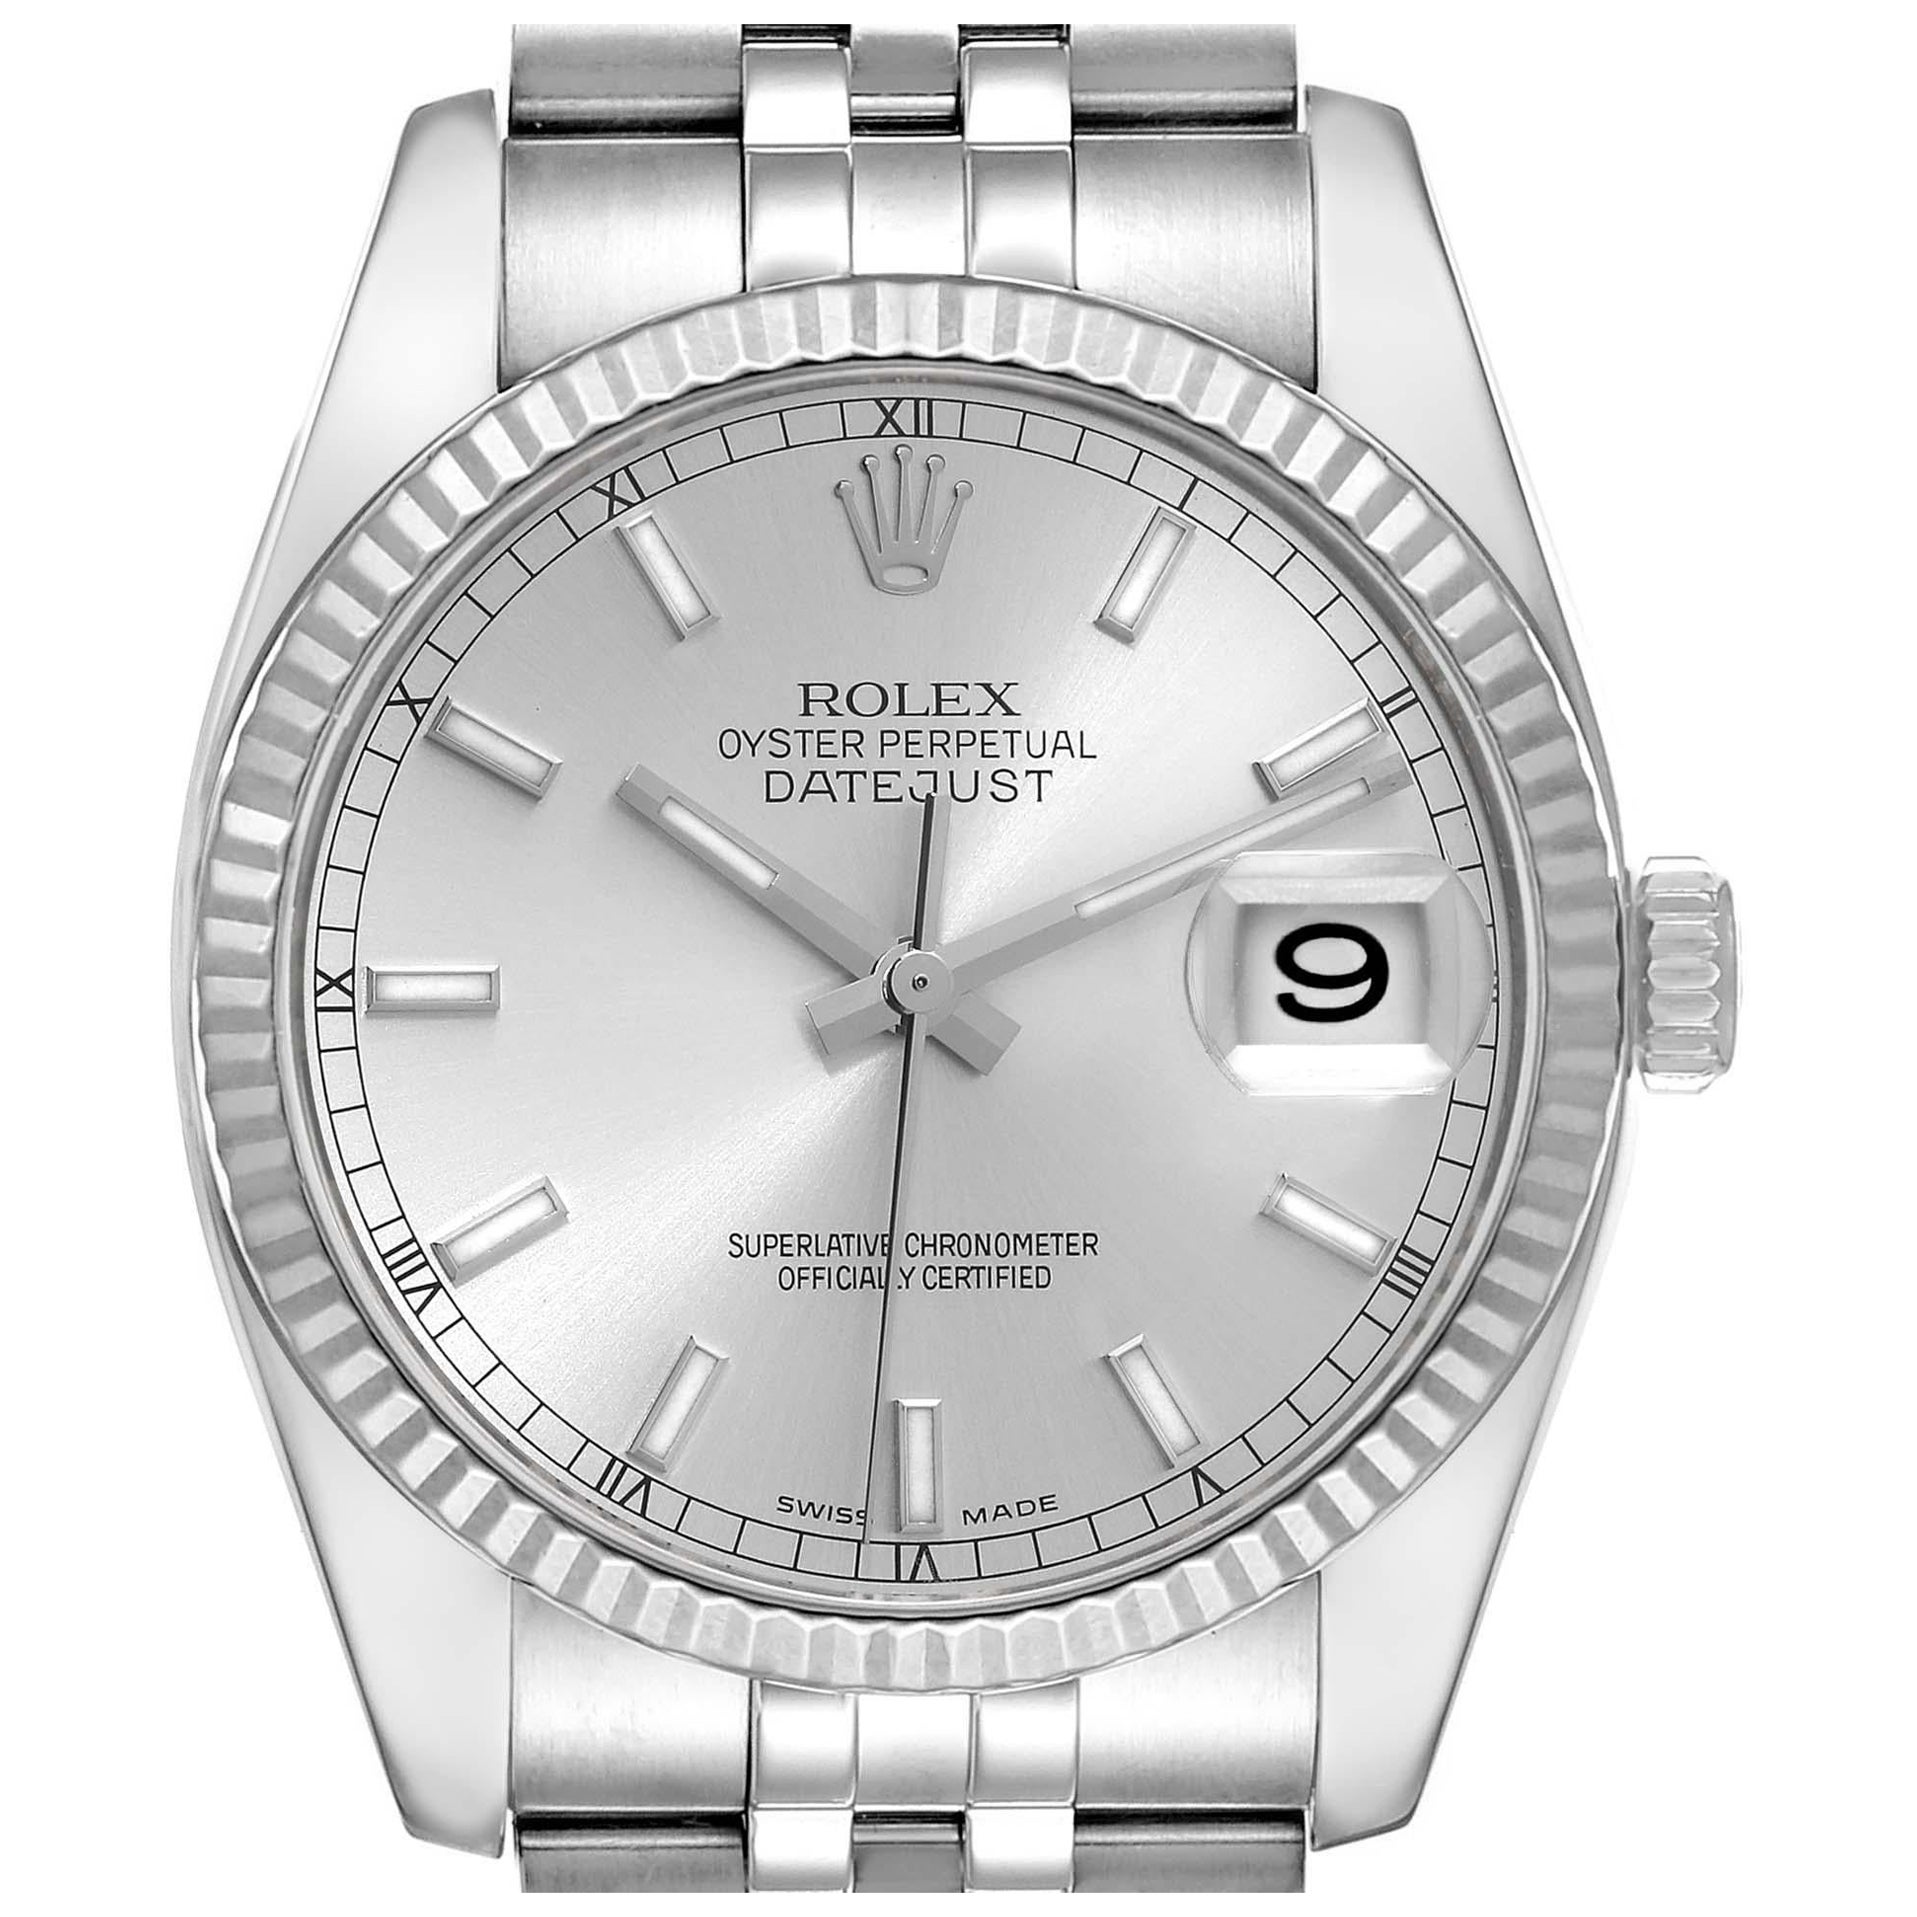 Rolex Datejust Steel White Gold Silver Dial Mens Watch 116234 Box Papers